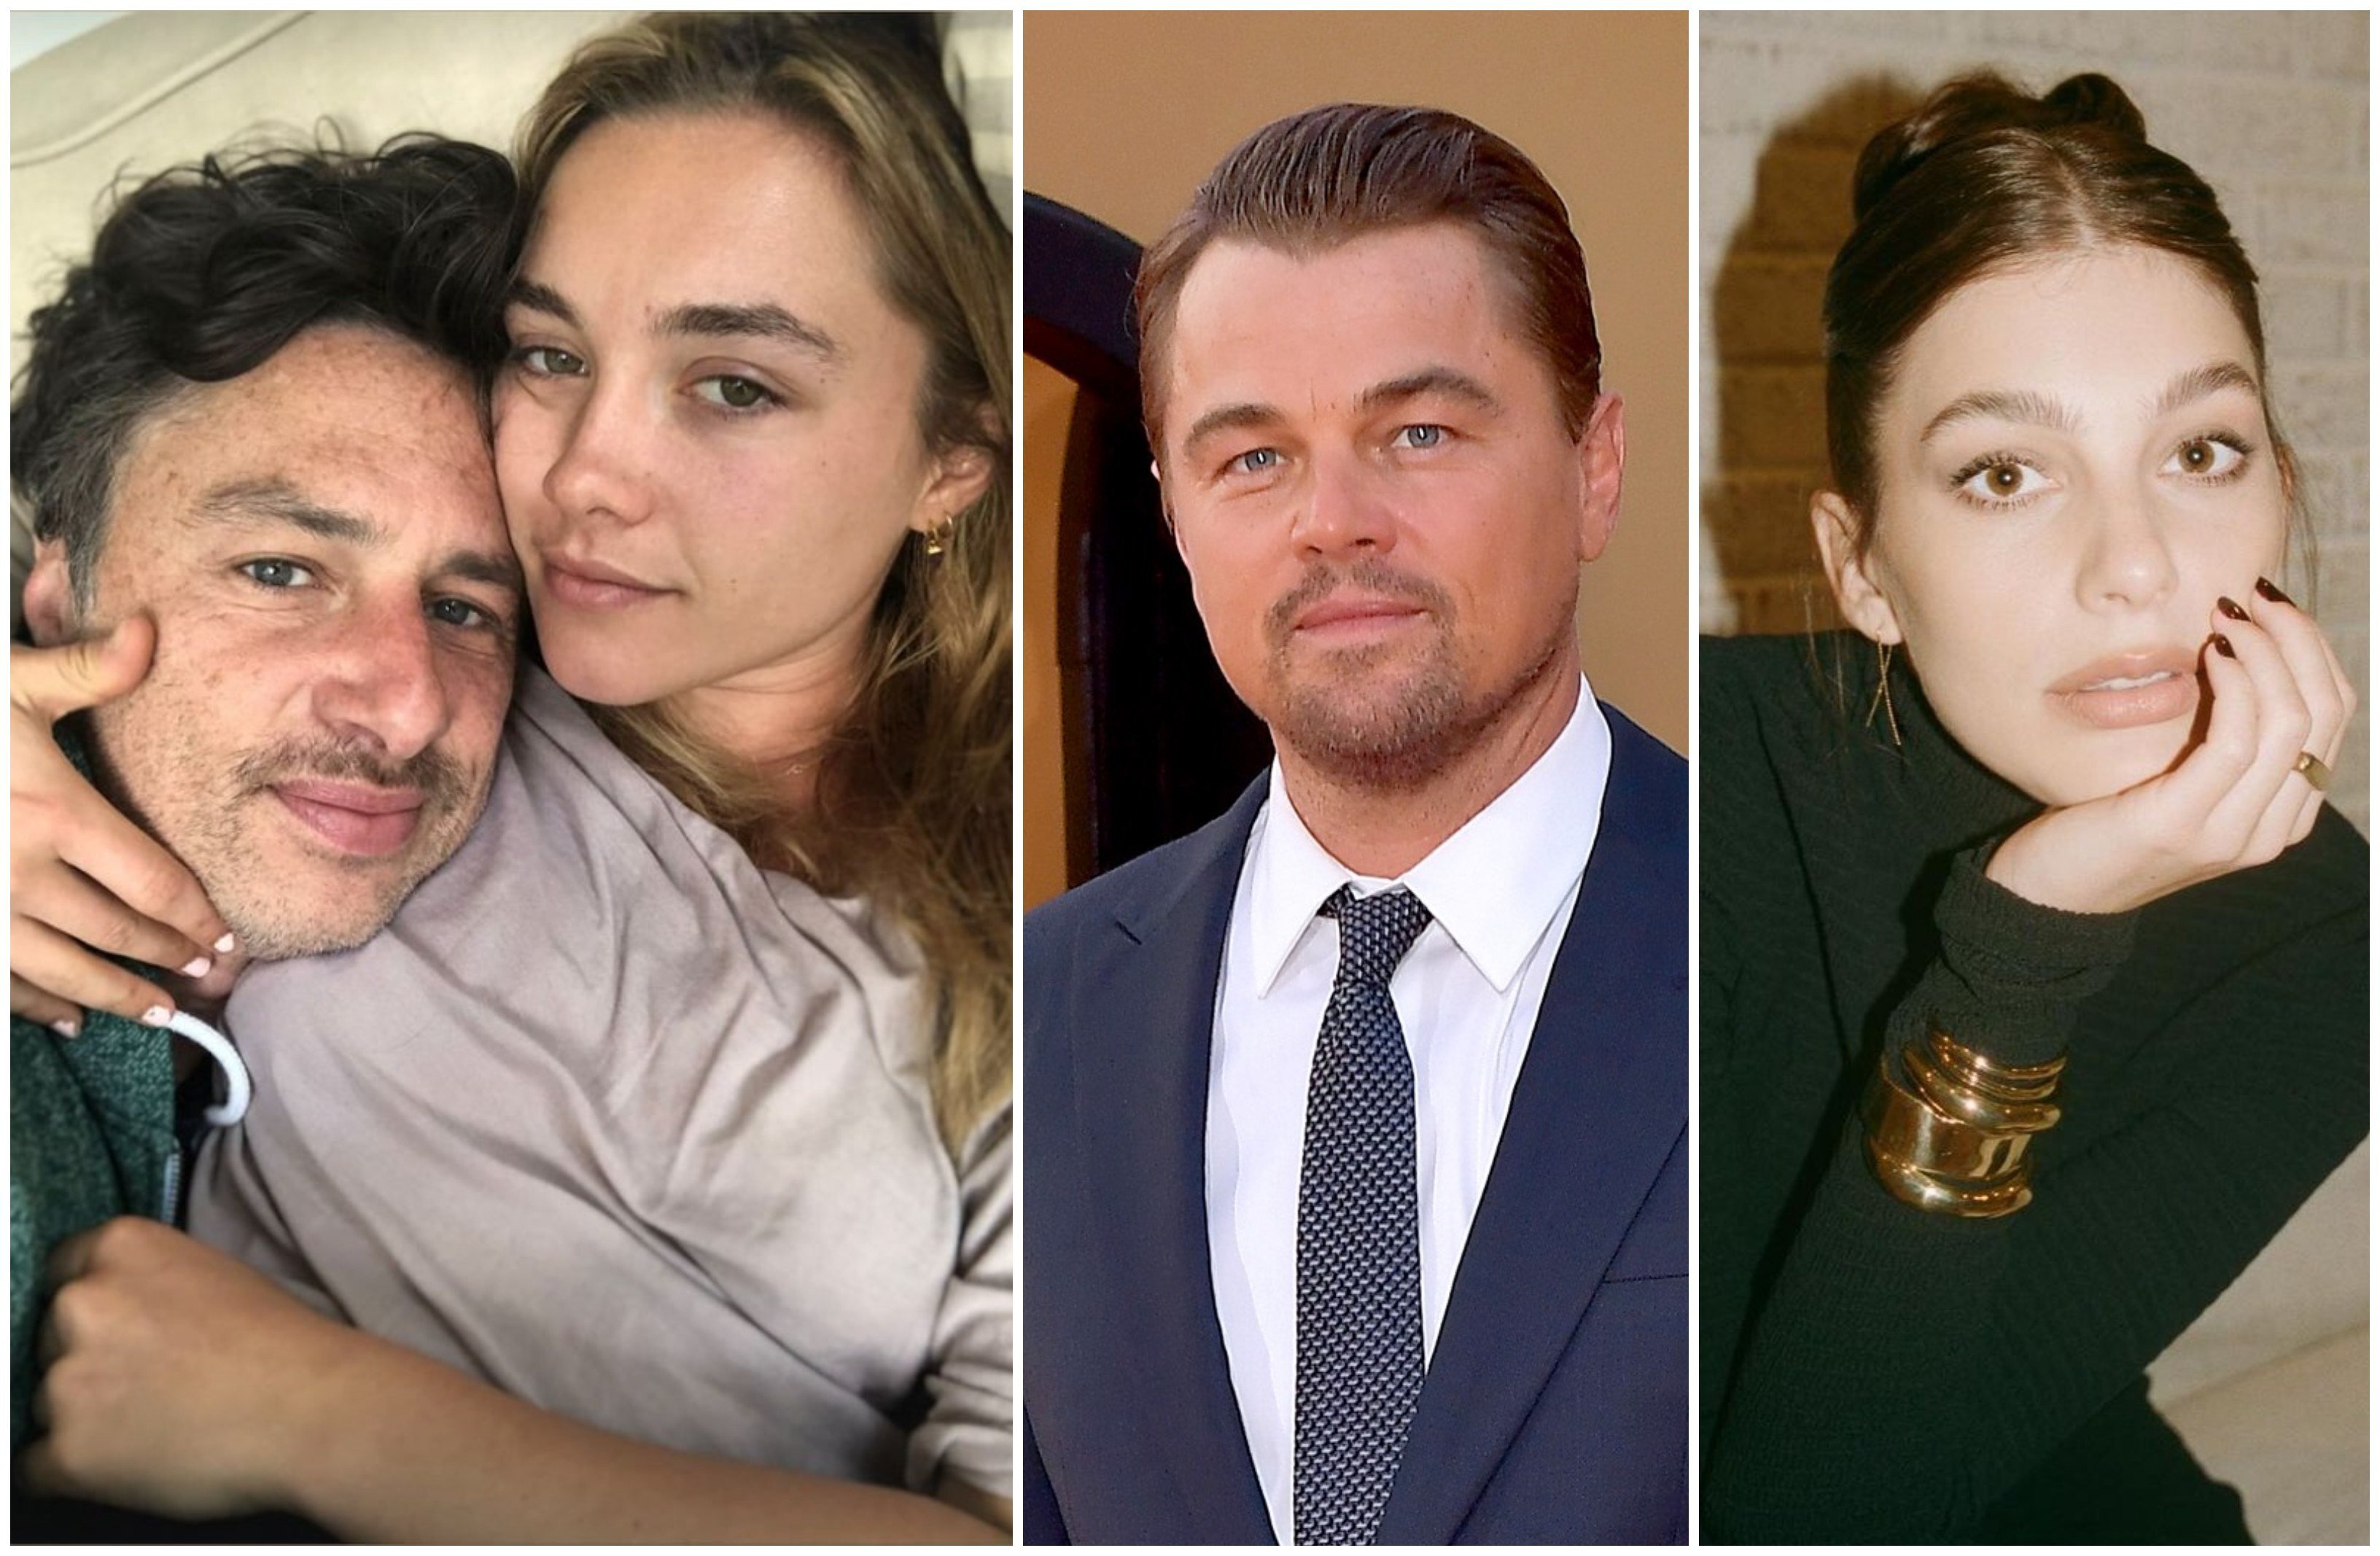 Hollywood stars with younger girlfriends: from Zach Braff and Florence Pugh, to Leonardo DiCaprio and Camila Morrone. Photos: @zachbraff,  @camilamorrone/Instagram; Getty